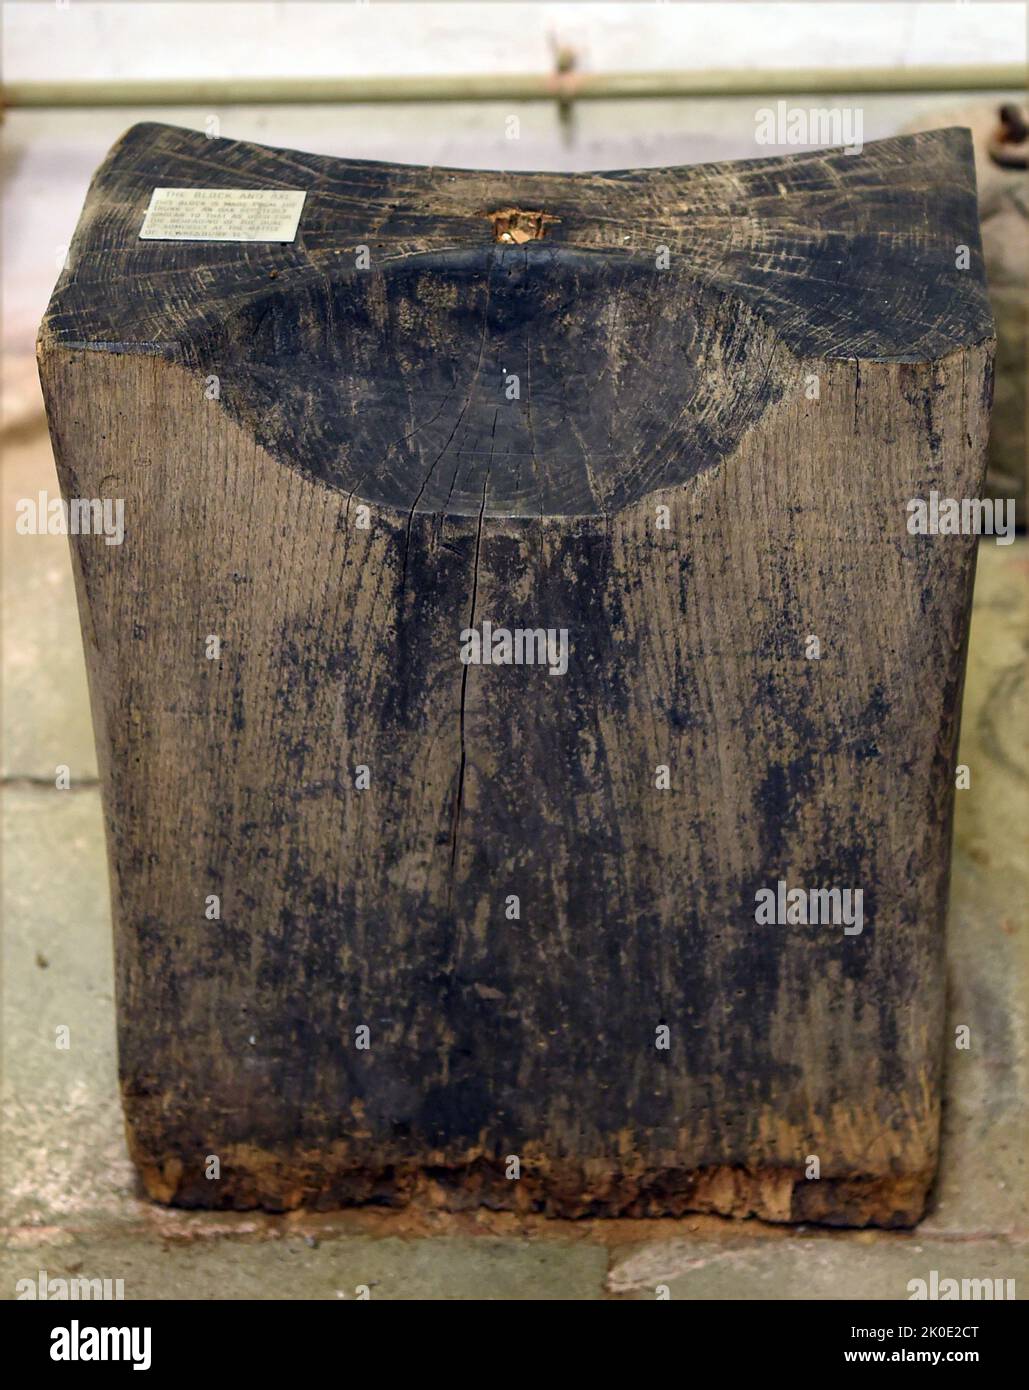 A 15th century English public execution block used to decapitate condemned prisoners. This was a form of capital punishment which members of the general public may voluntarily attend. Stock Photo